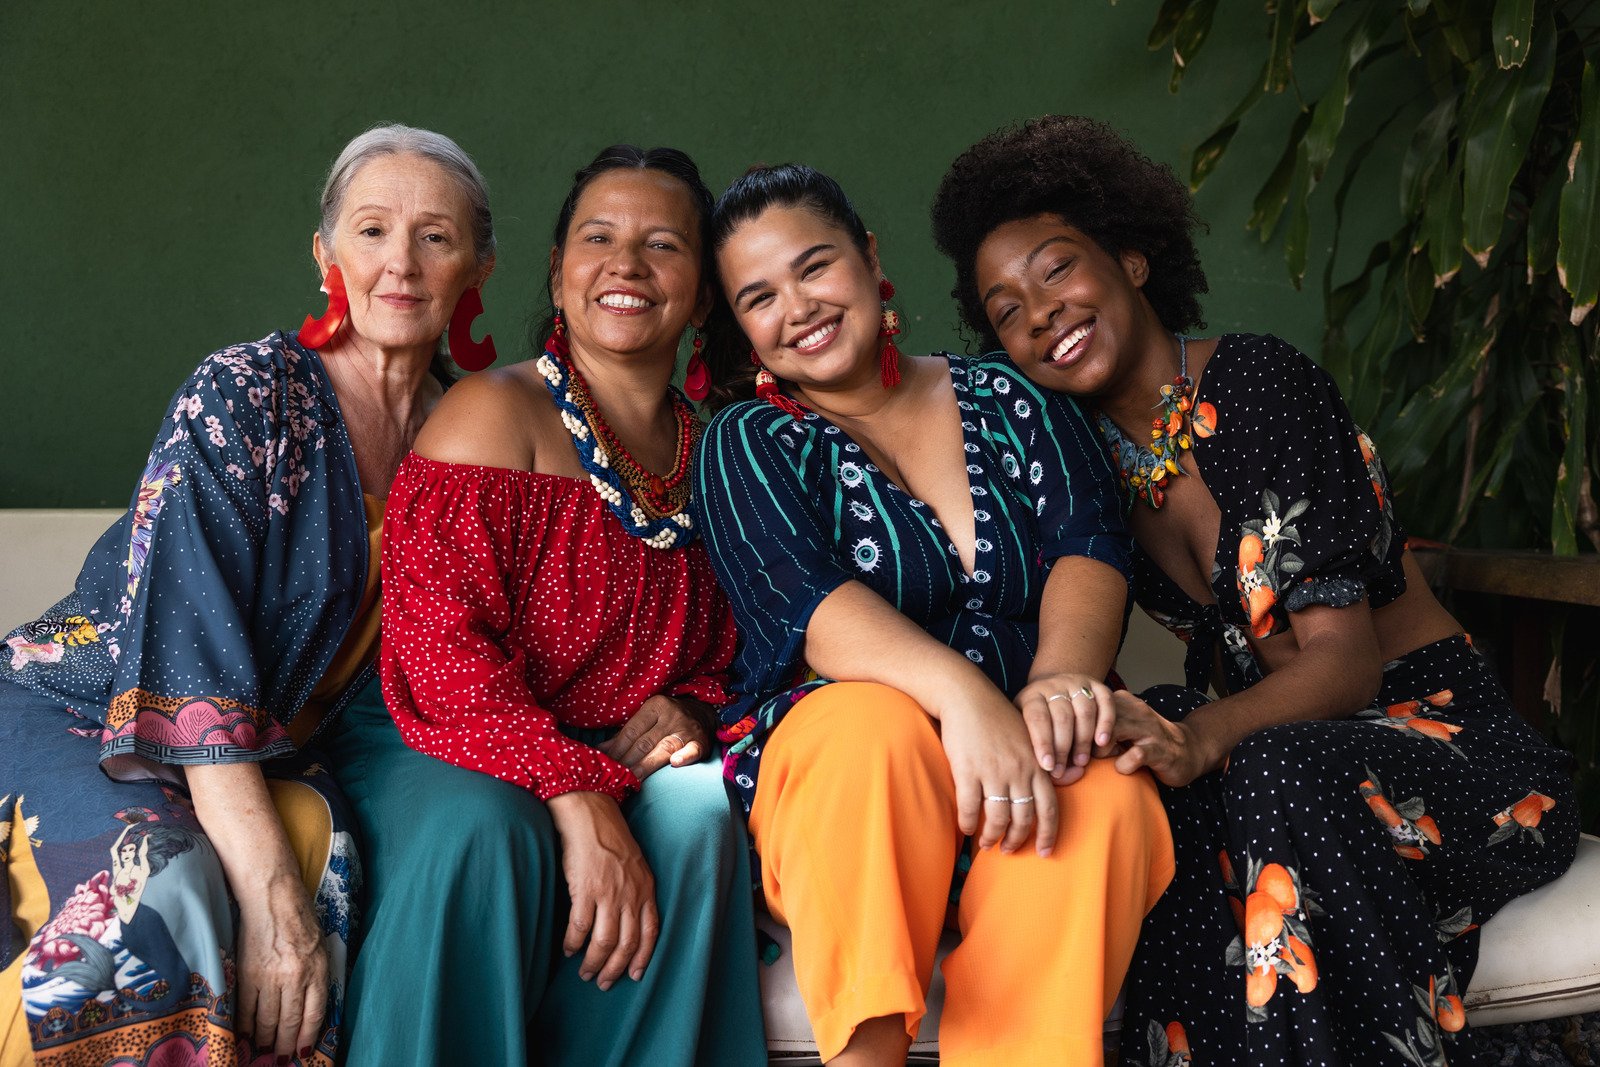 Brazilian Women Group of Diverse Women Sitting on a Couch - Photos by Canva